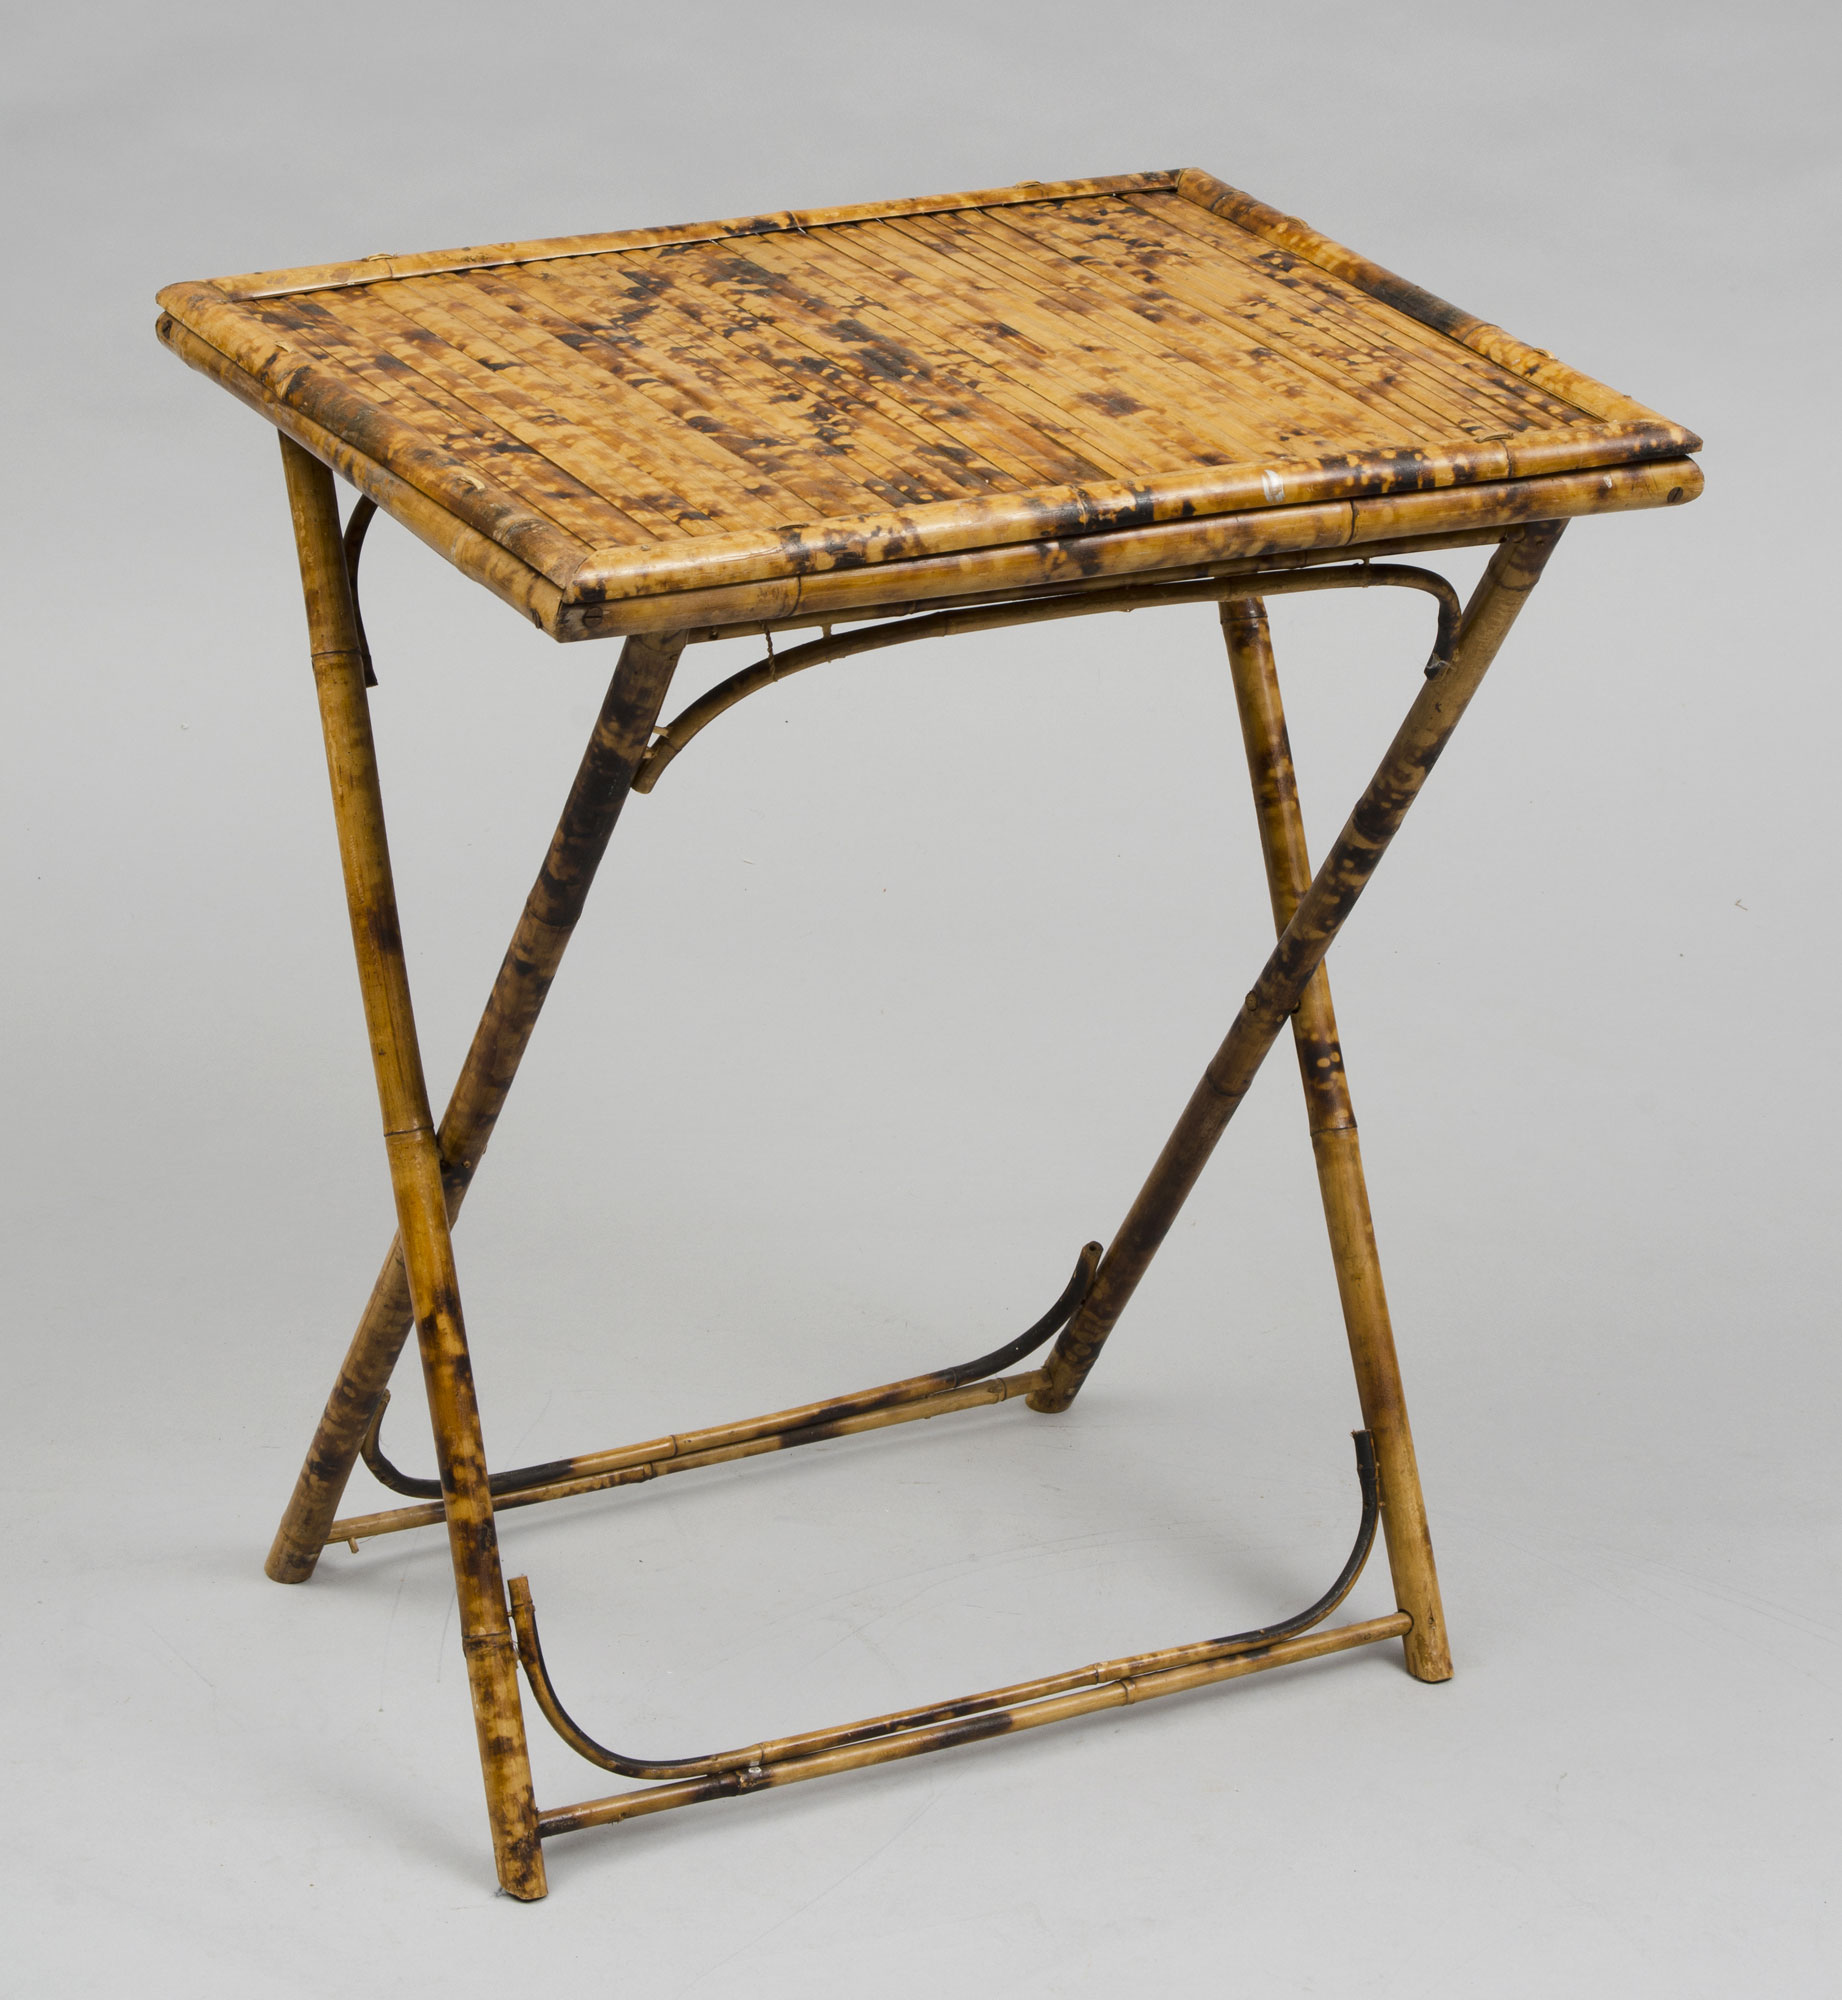 Antique Folding Table | Pair of Antique English Bamboo Folding Tables